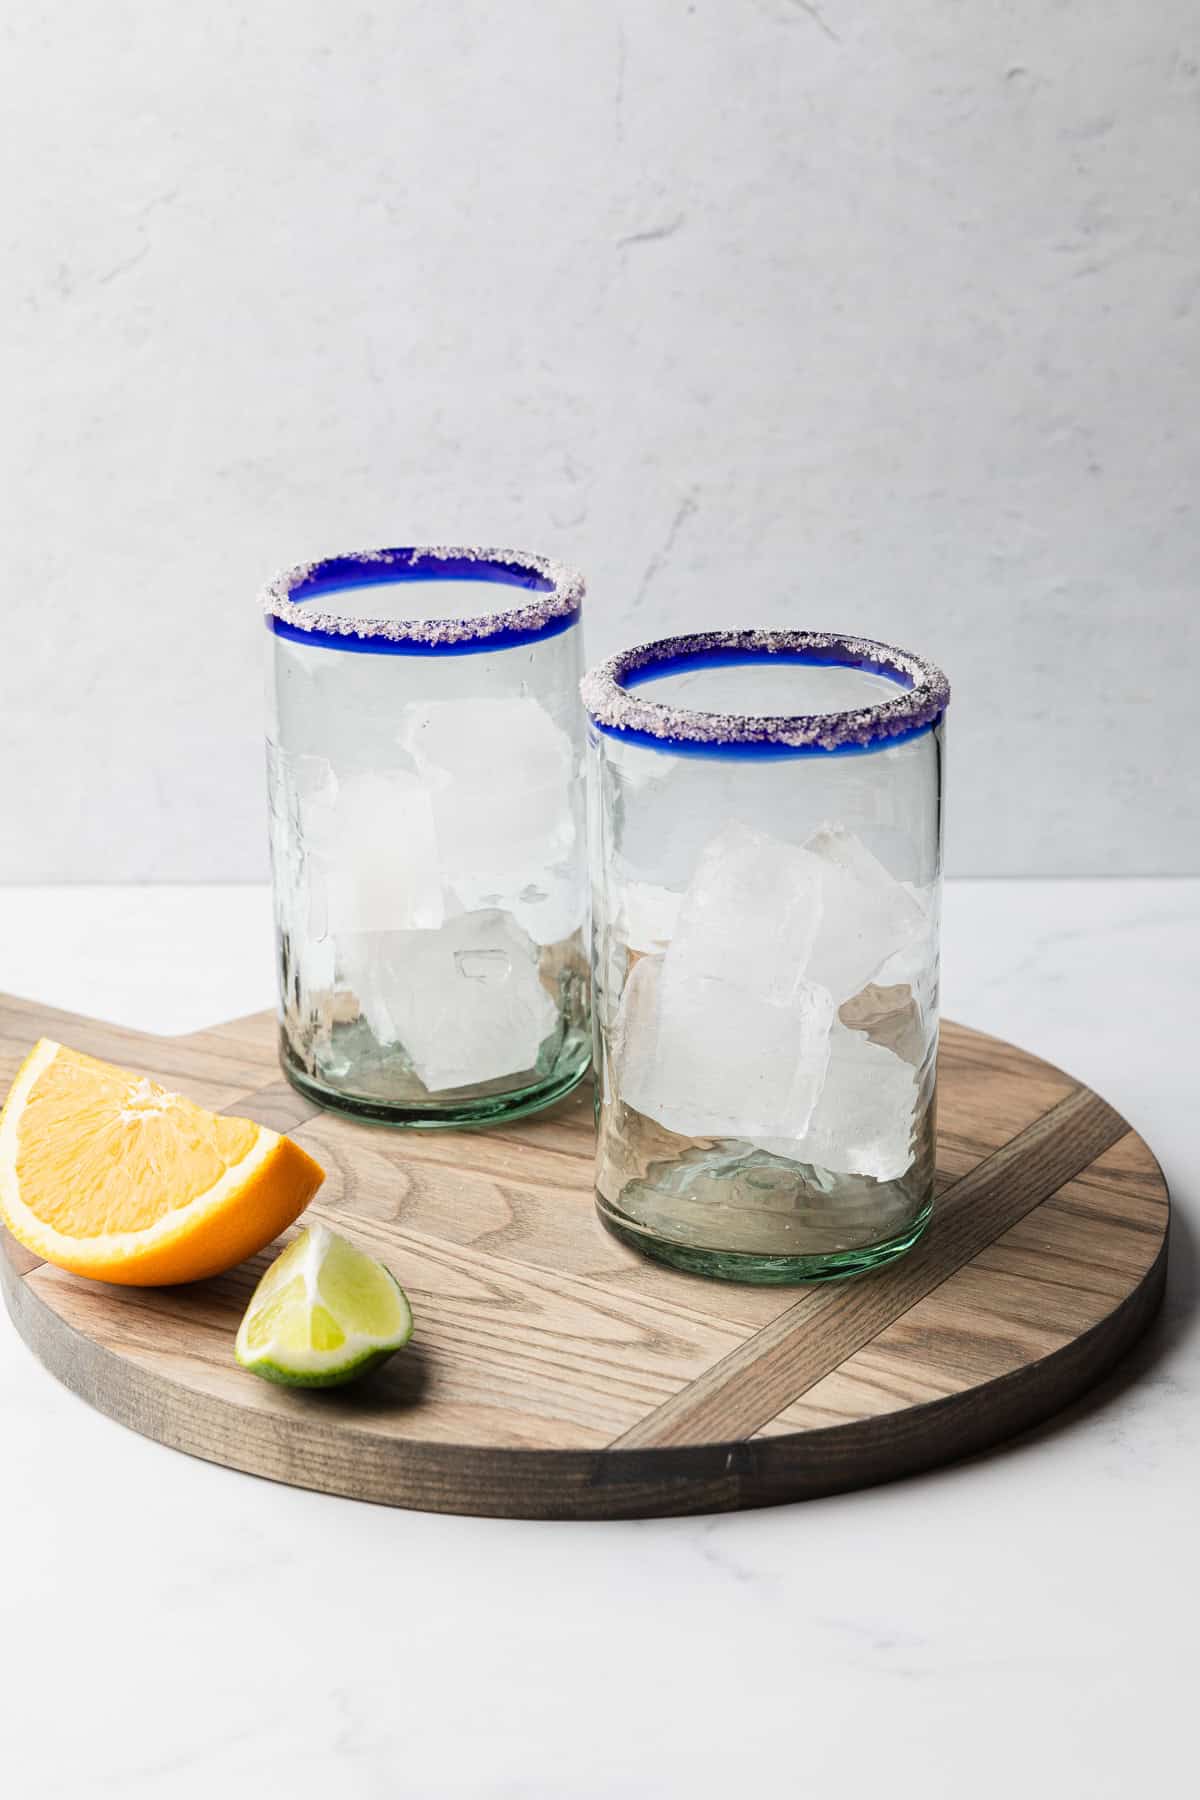 Two salted rim glasses with ice cubes.